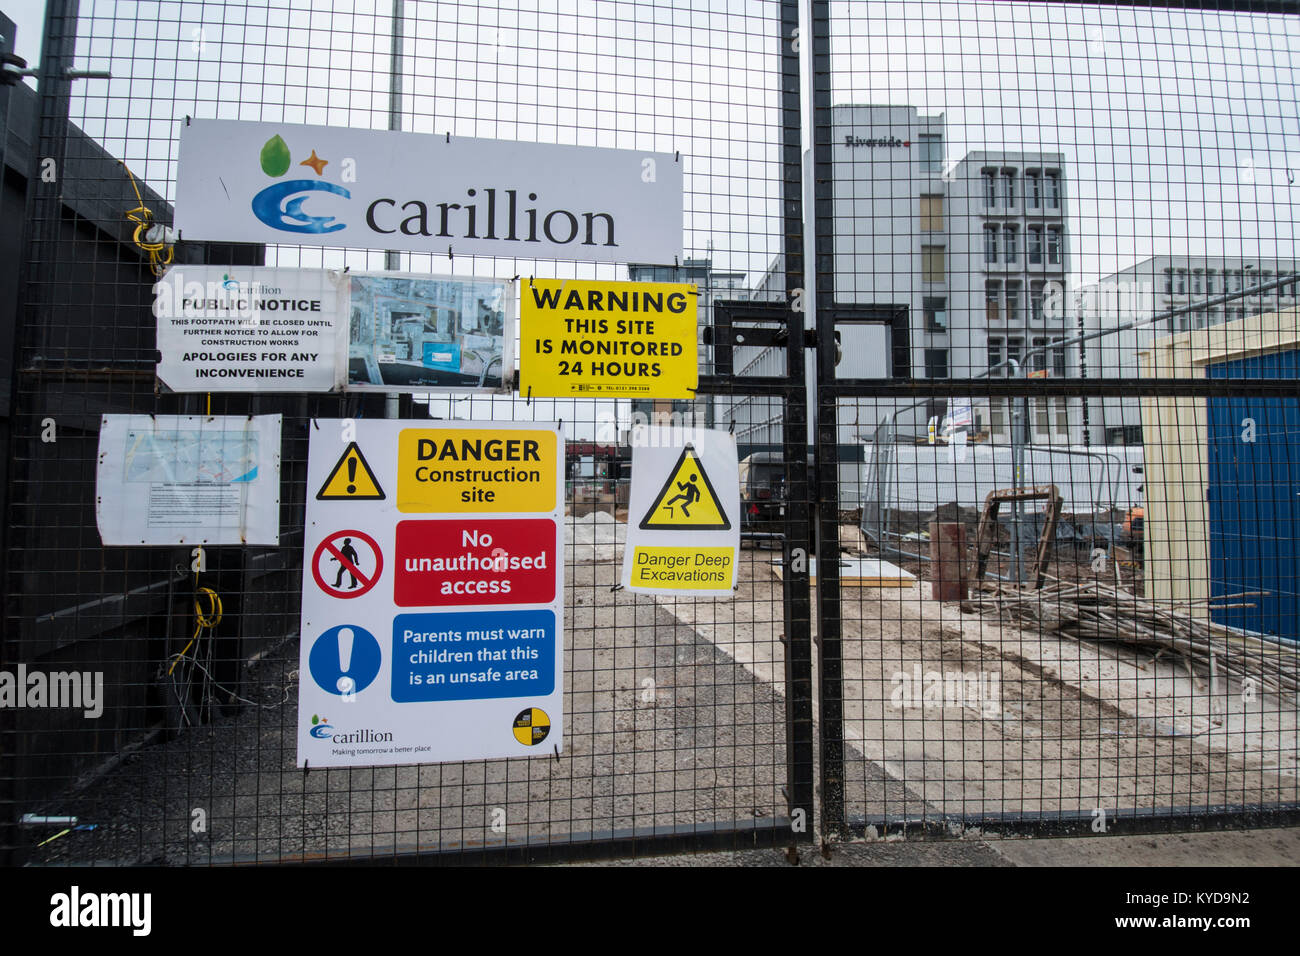 Wolverhampton, Britain, UK. 14th. January 2018: Carillion the construction and outsourcing company which is based in Wolverhampton and has contracts with several public sector projects such as HS2 and NHS projects, is currently in talks with the government in an attempt to prevent the collapse of the company due to a financial crisis and a plummeting share price. Stock Photo